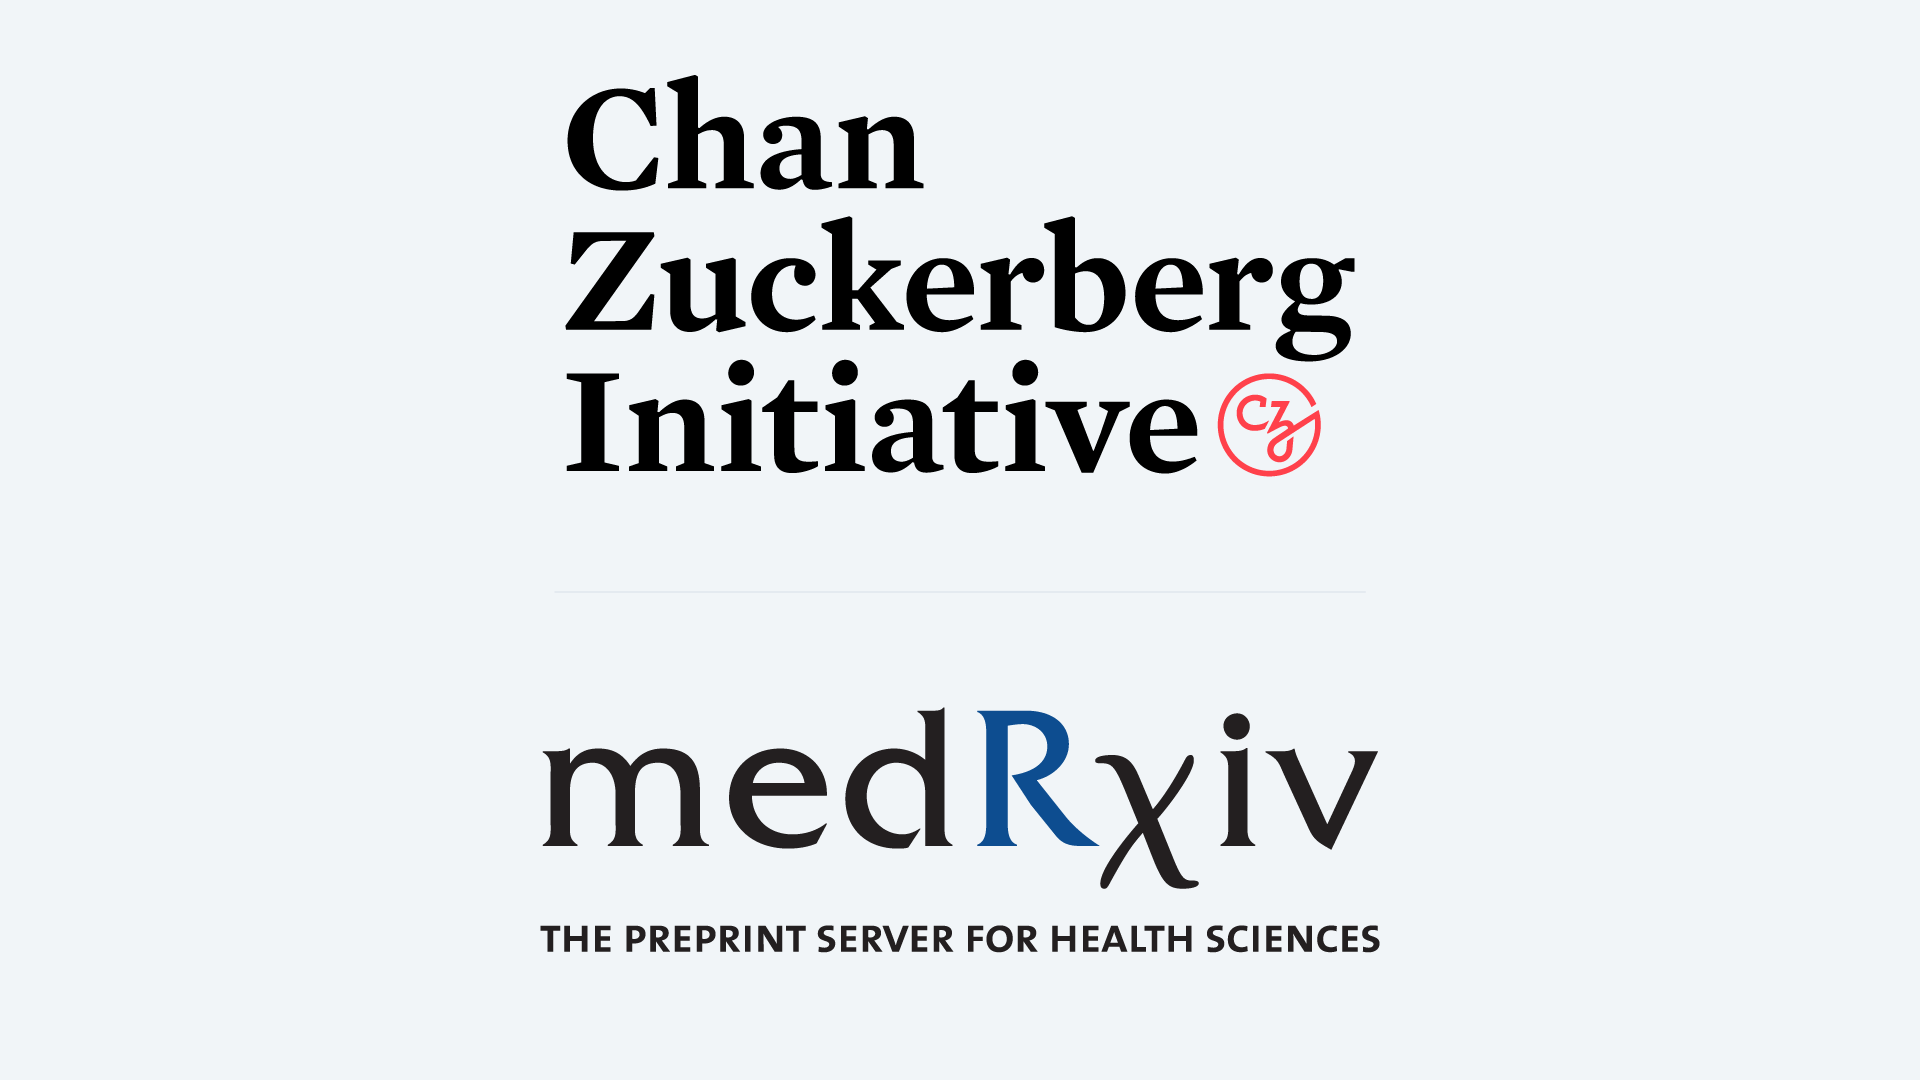 graphic of Chan Zuckerberg Initiative and medRxiv logos